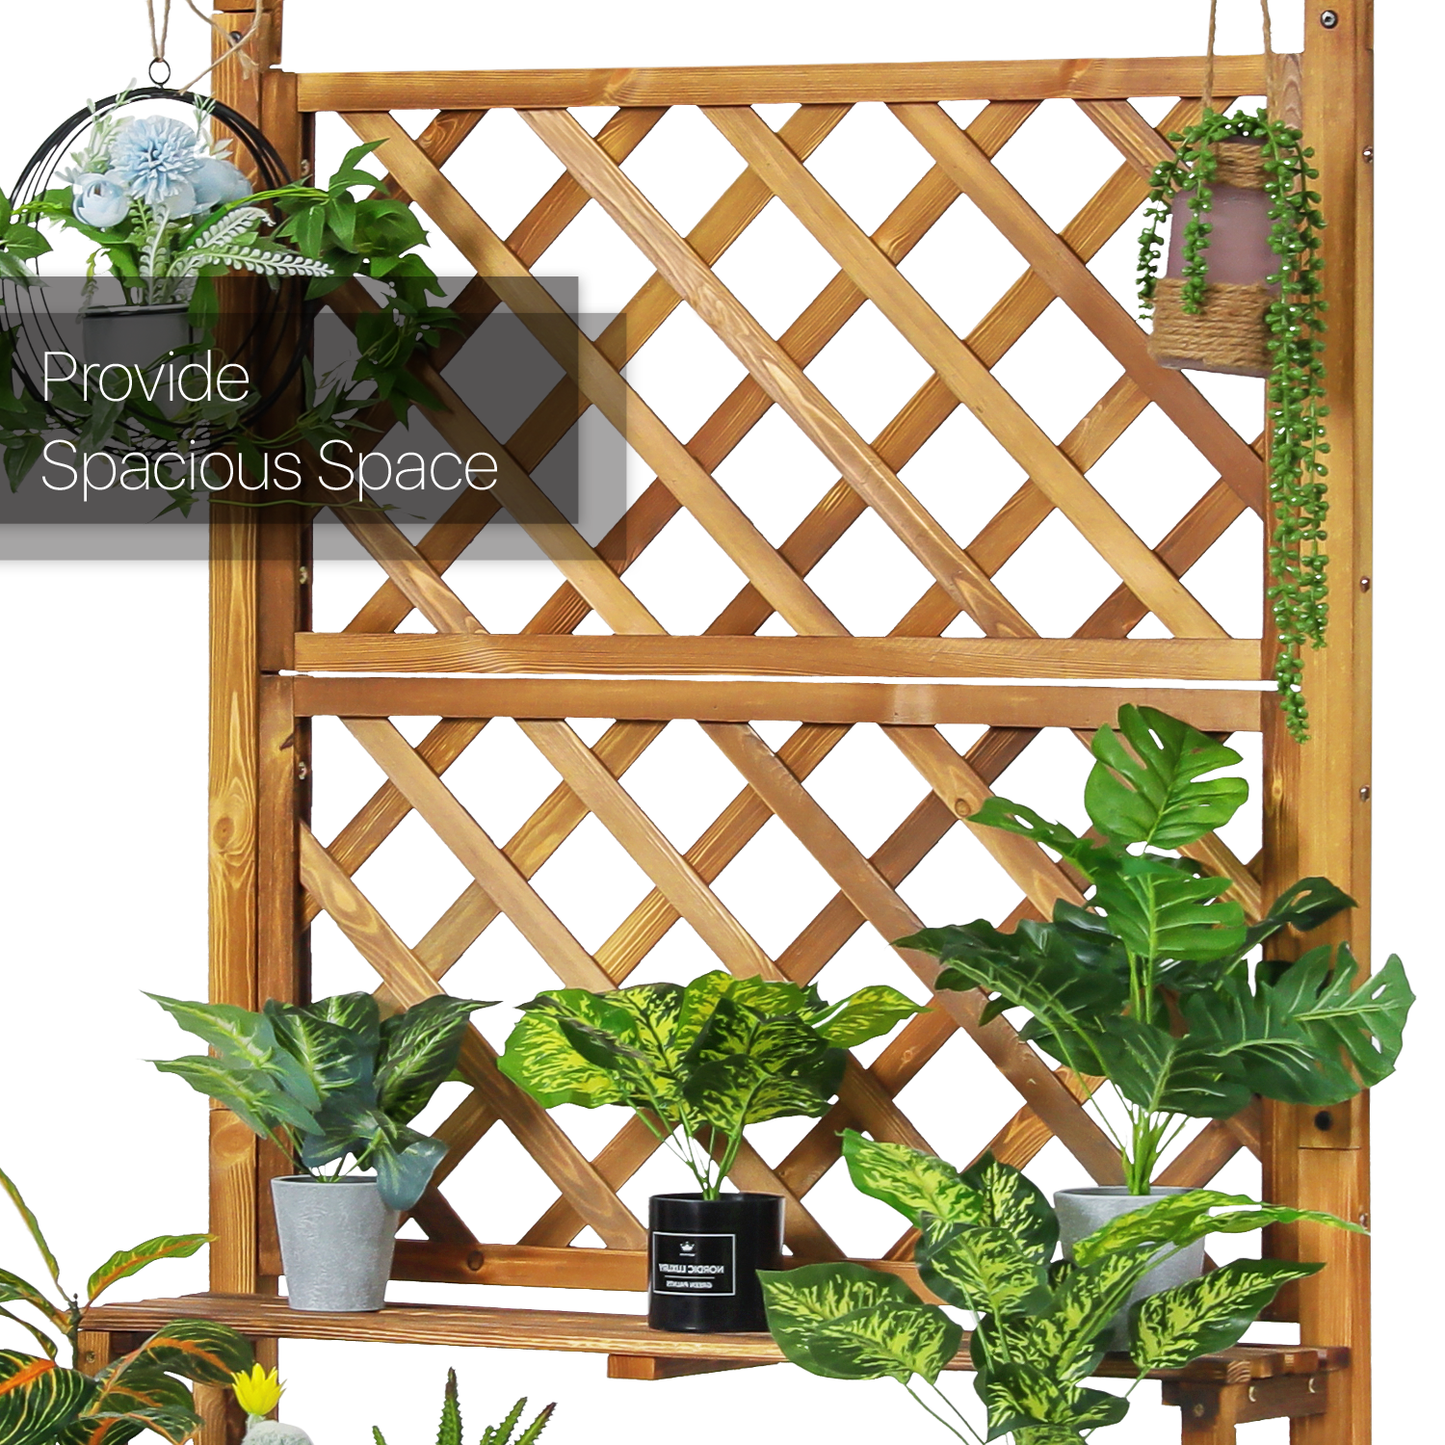 Wooden Trellis Display Stair Shelf - Arch with Hooks - 3 Tier - Carbonized